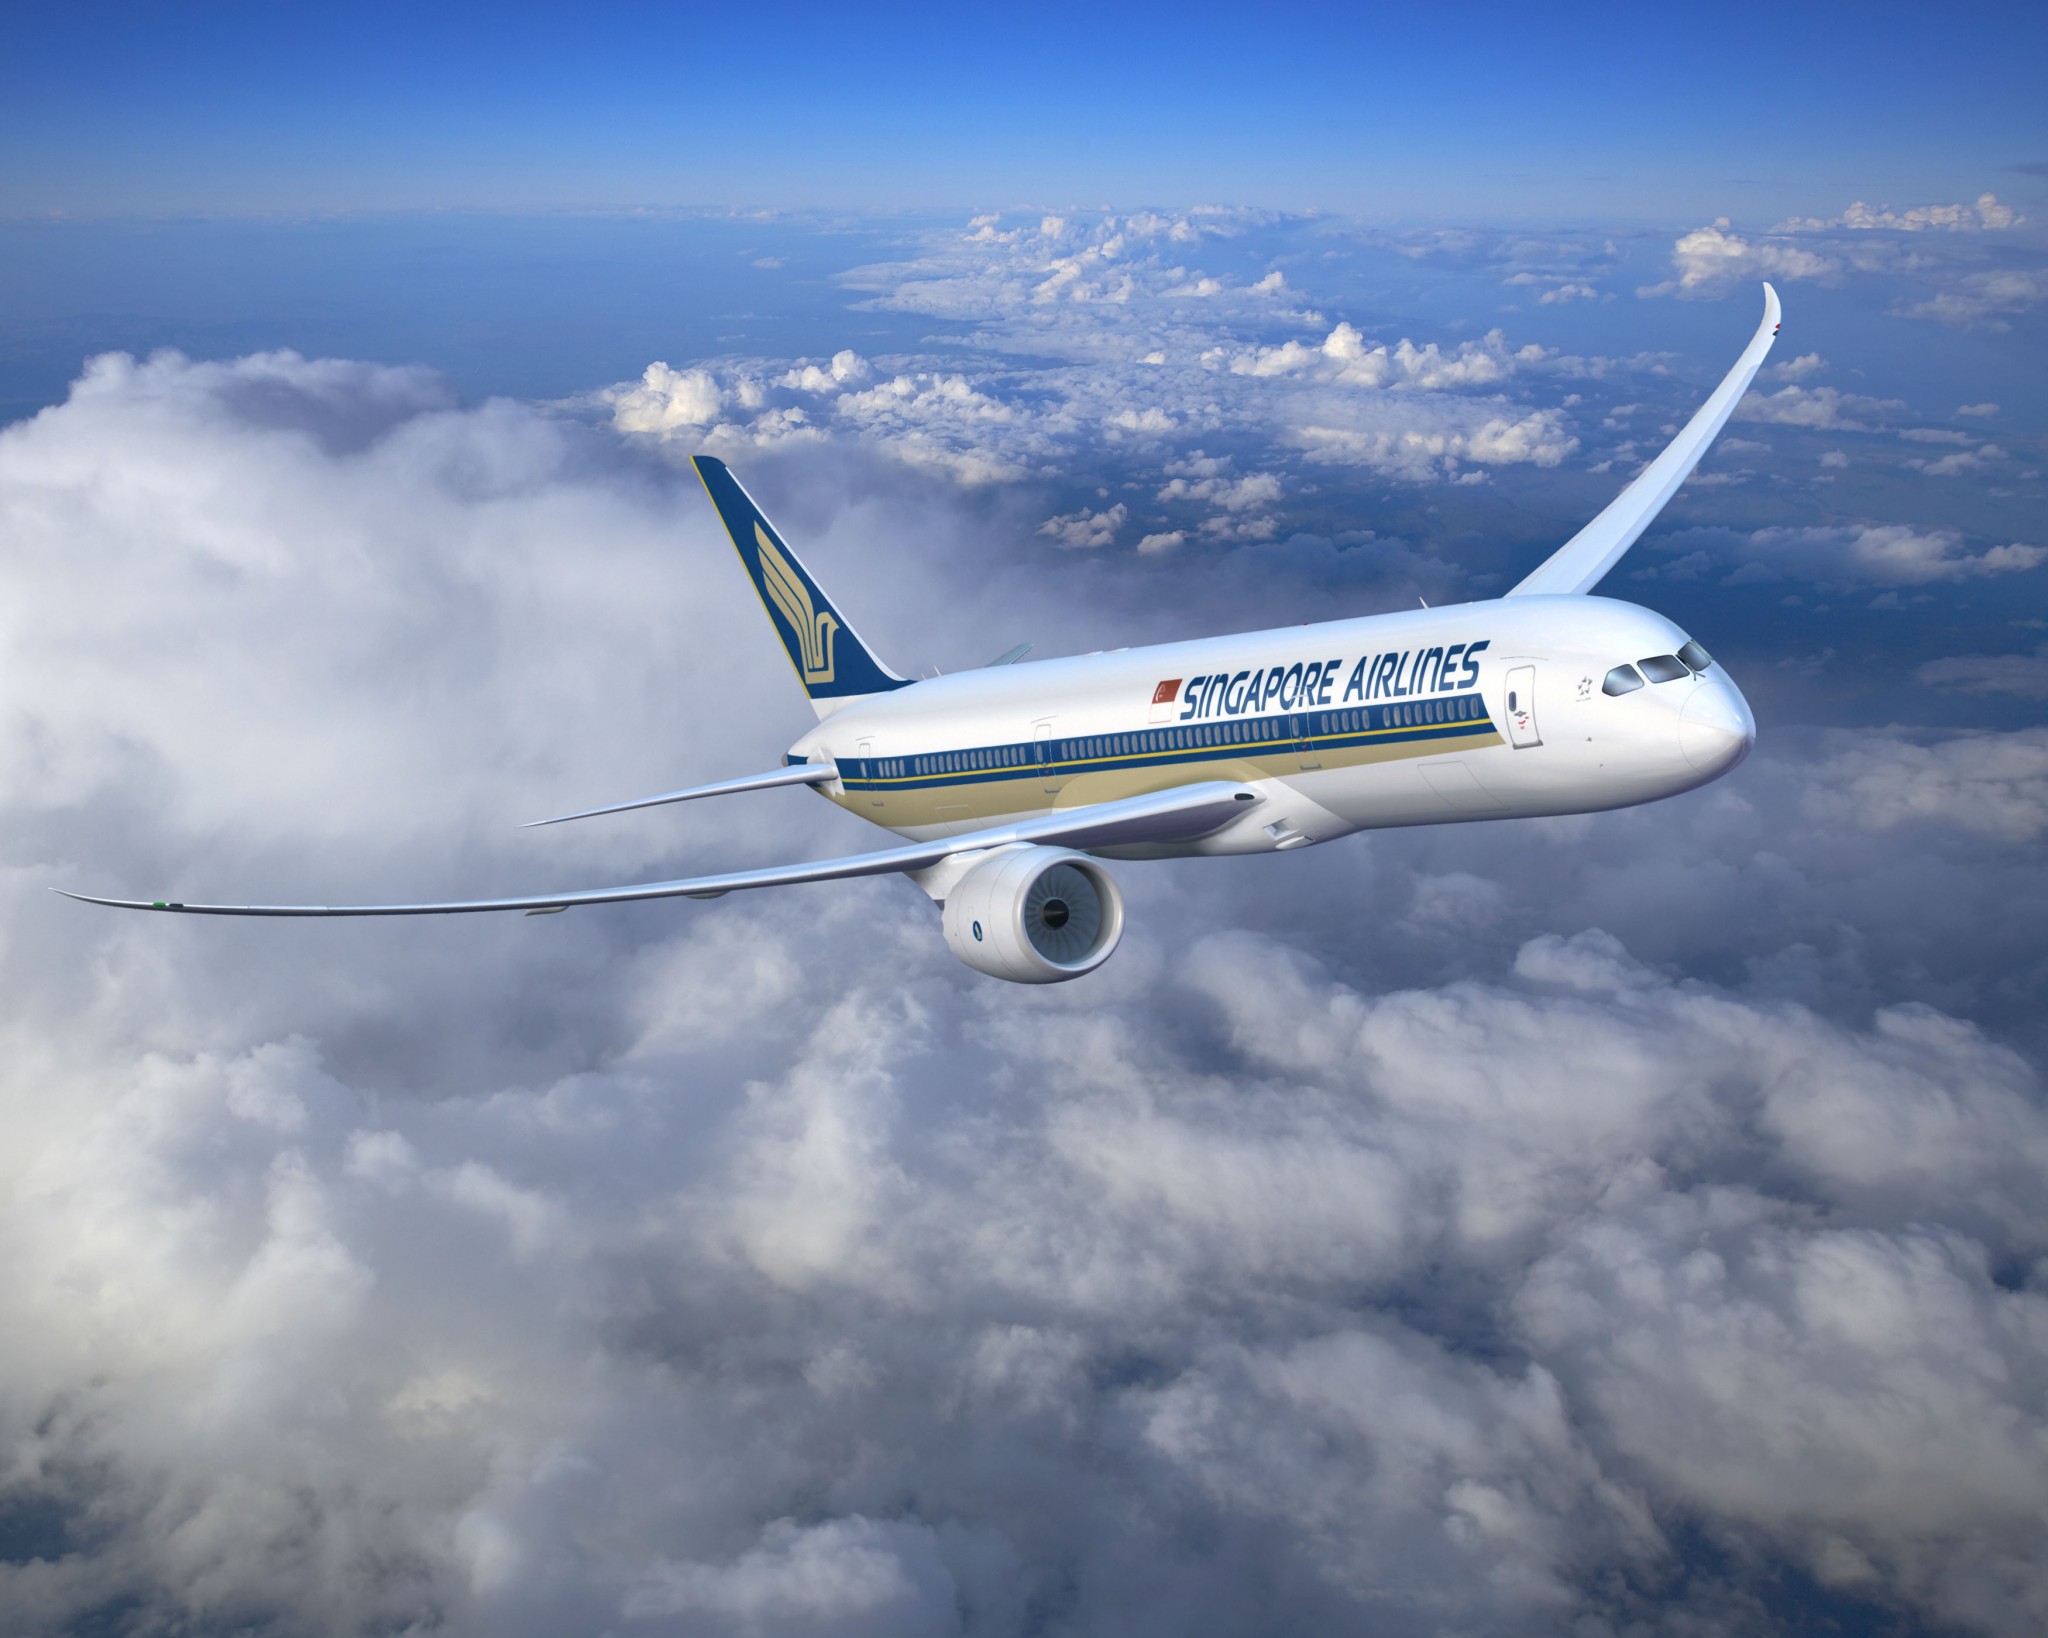 Singapore Airlines chooses Mobil Jet Oil 387